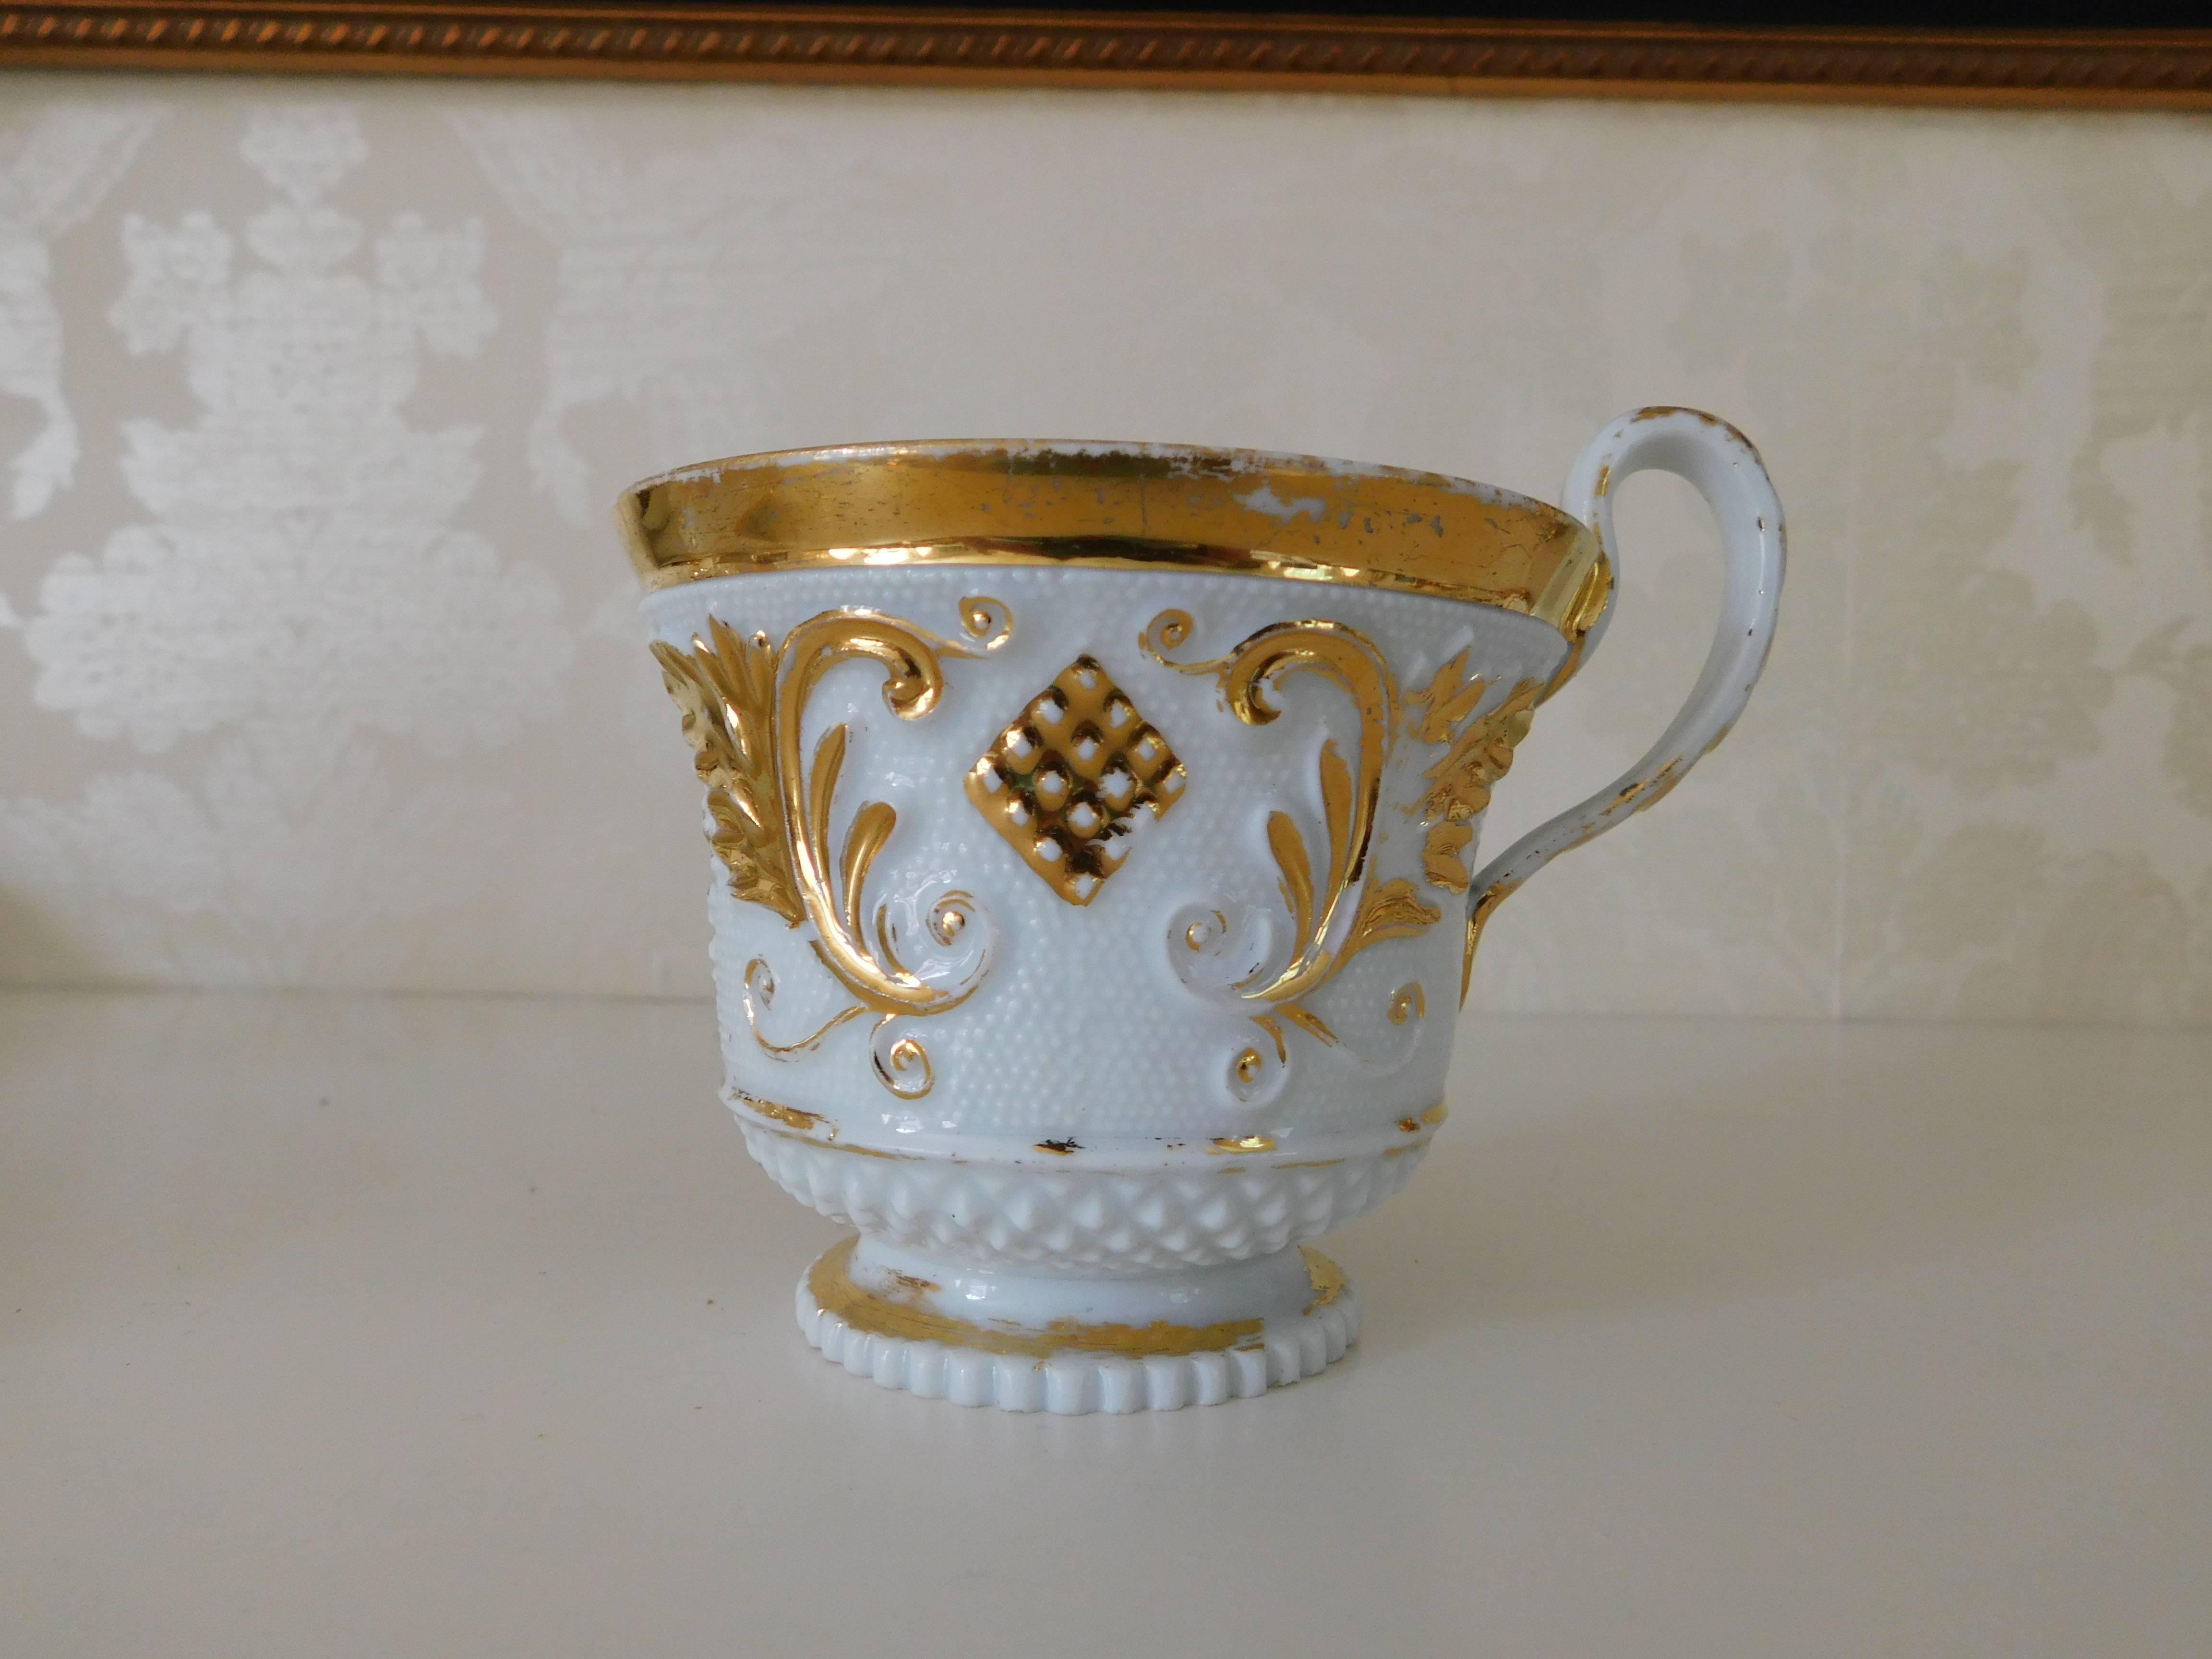 Early 19th century Meissen porcelain cup and saucer white with gold gilt.
Measurements in inches:
Cup 3.5 D x 3 H
Saucer 6 D x 1 H.
 